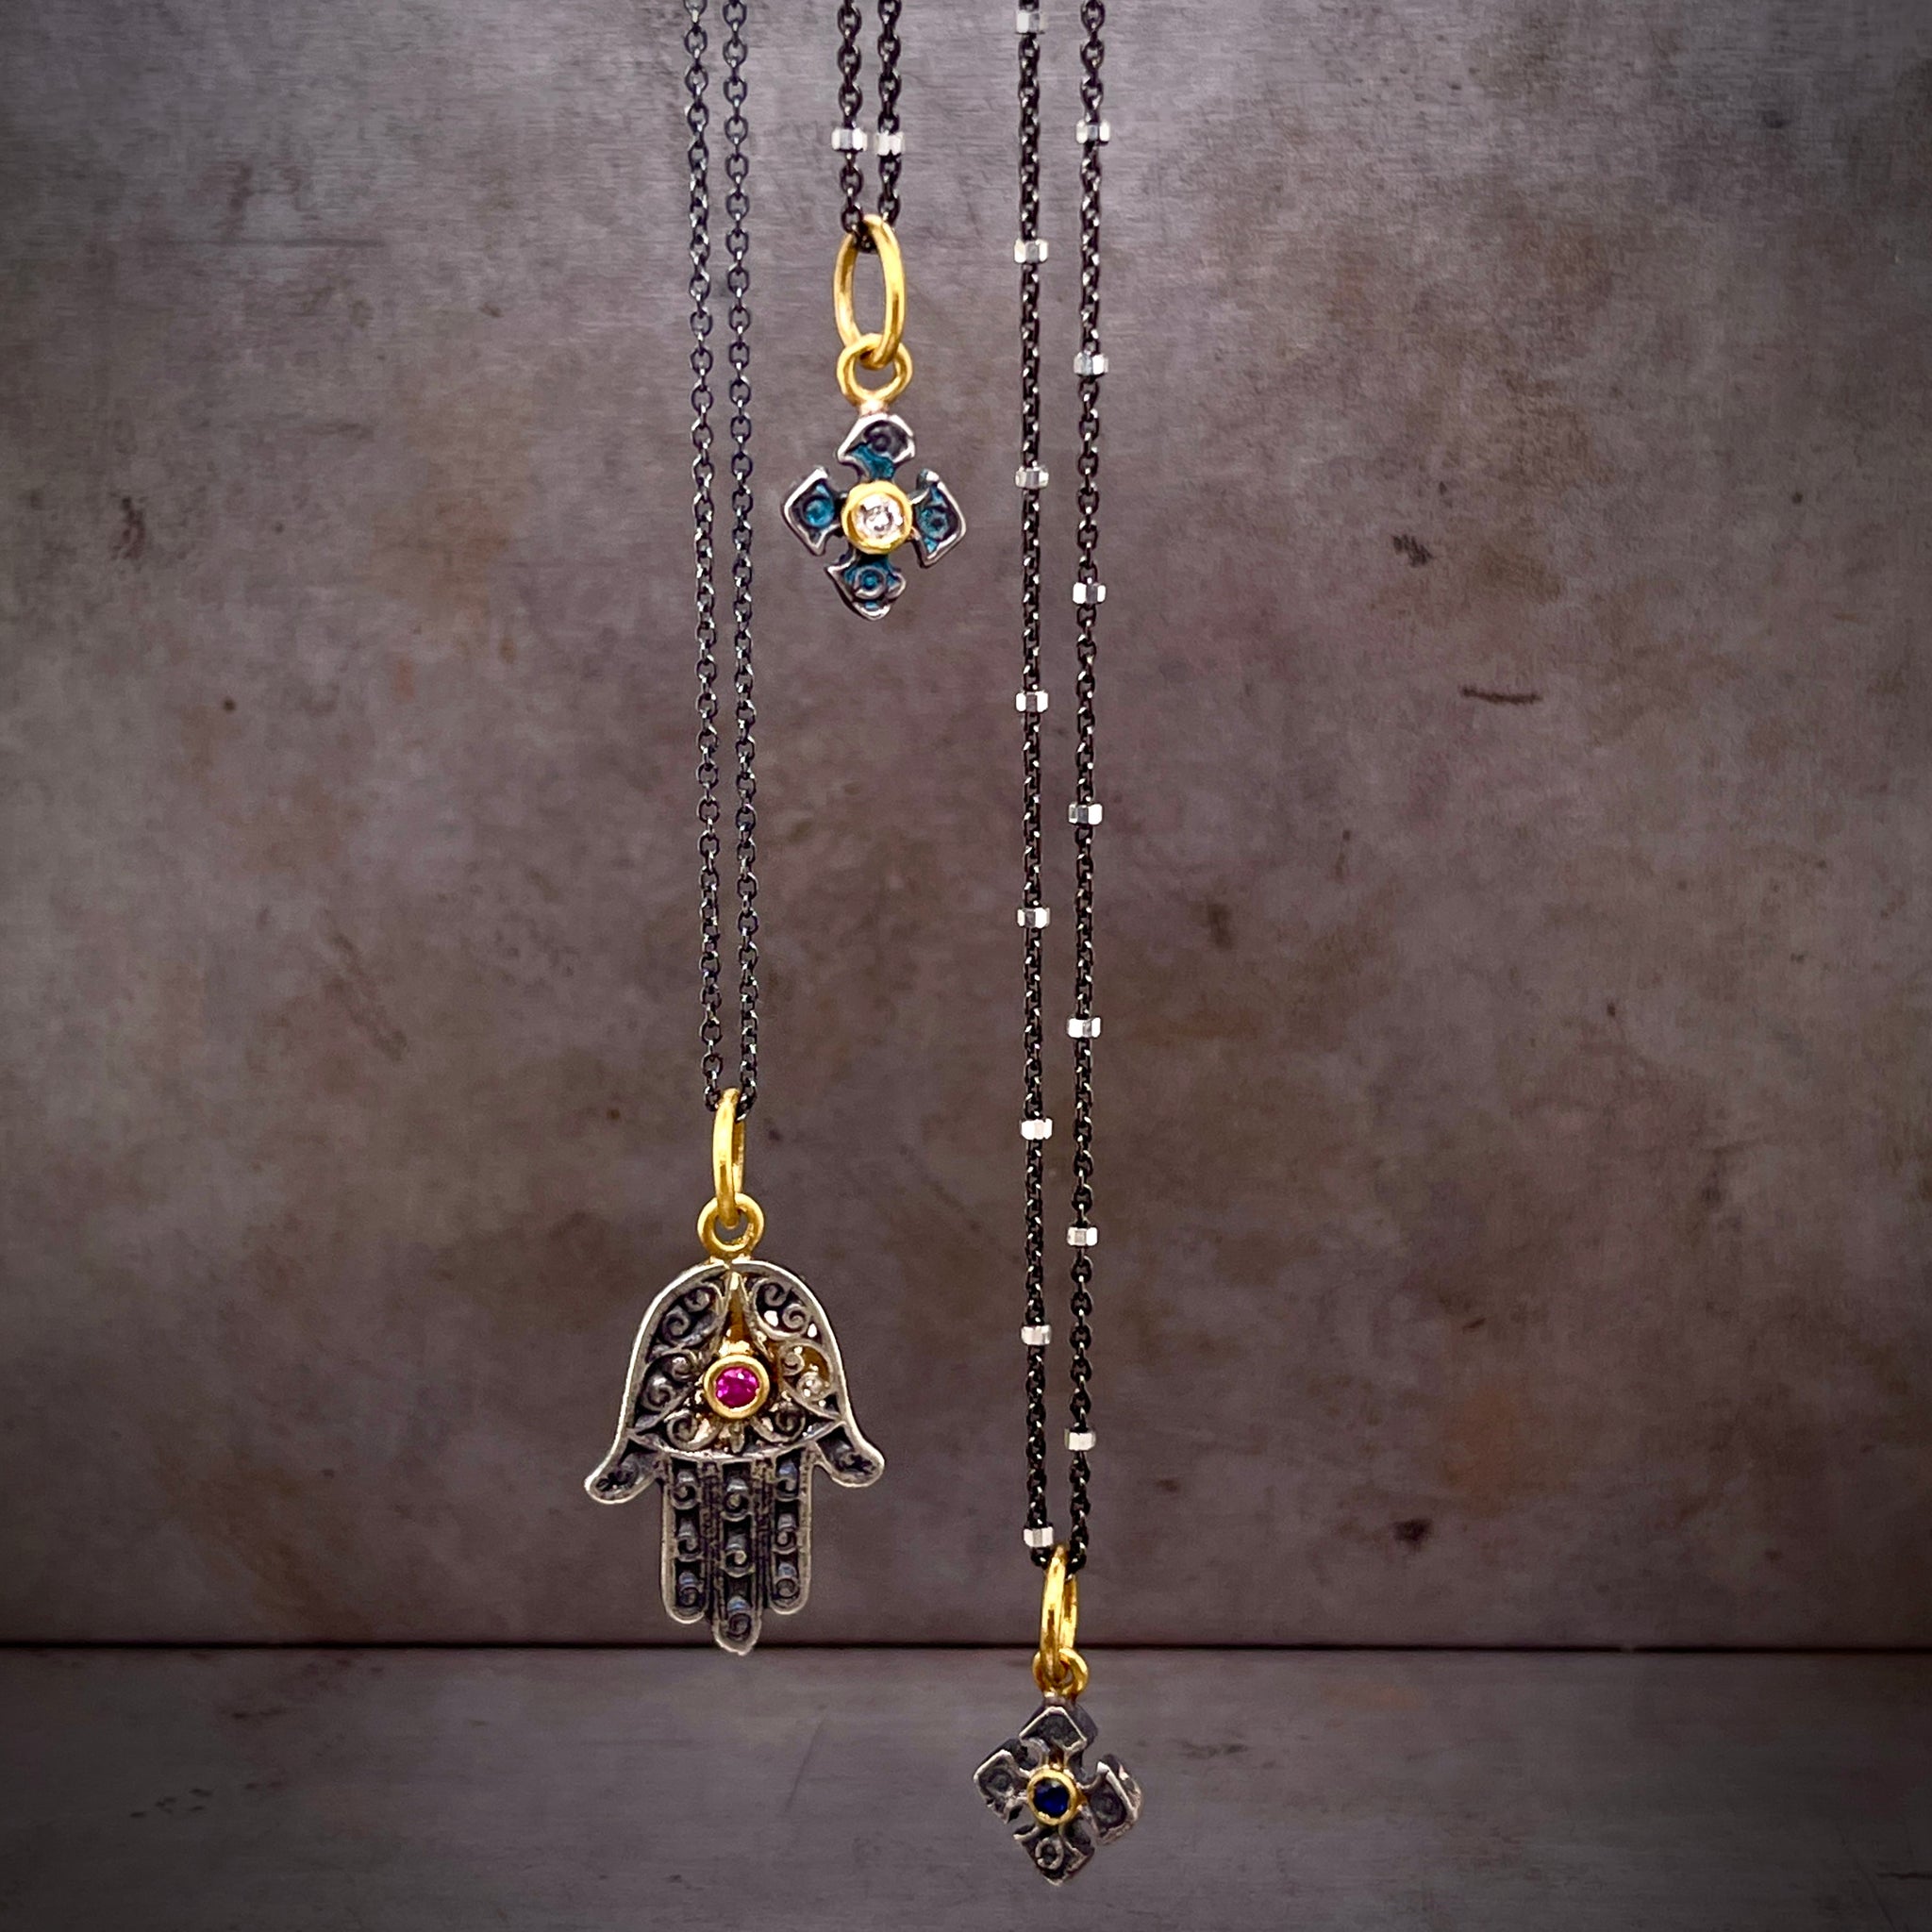 Three necklaces hang at different lengths in the air. The left is a hams hand made from oxidized silver with a round ruby set in yellow gold in the center. The center necklace is a cross with a blue coating over its silver and a round diamond set in its center. The right pendant is a crosse with a round blue sapphire set in yellow gold.